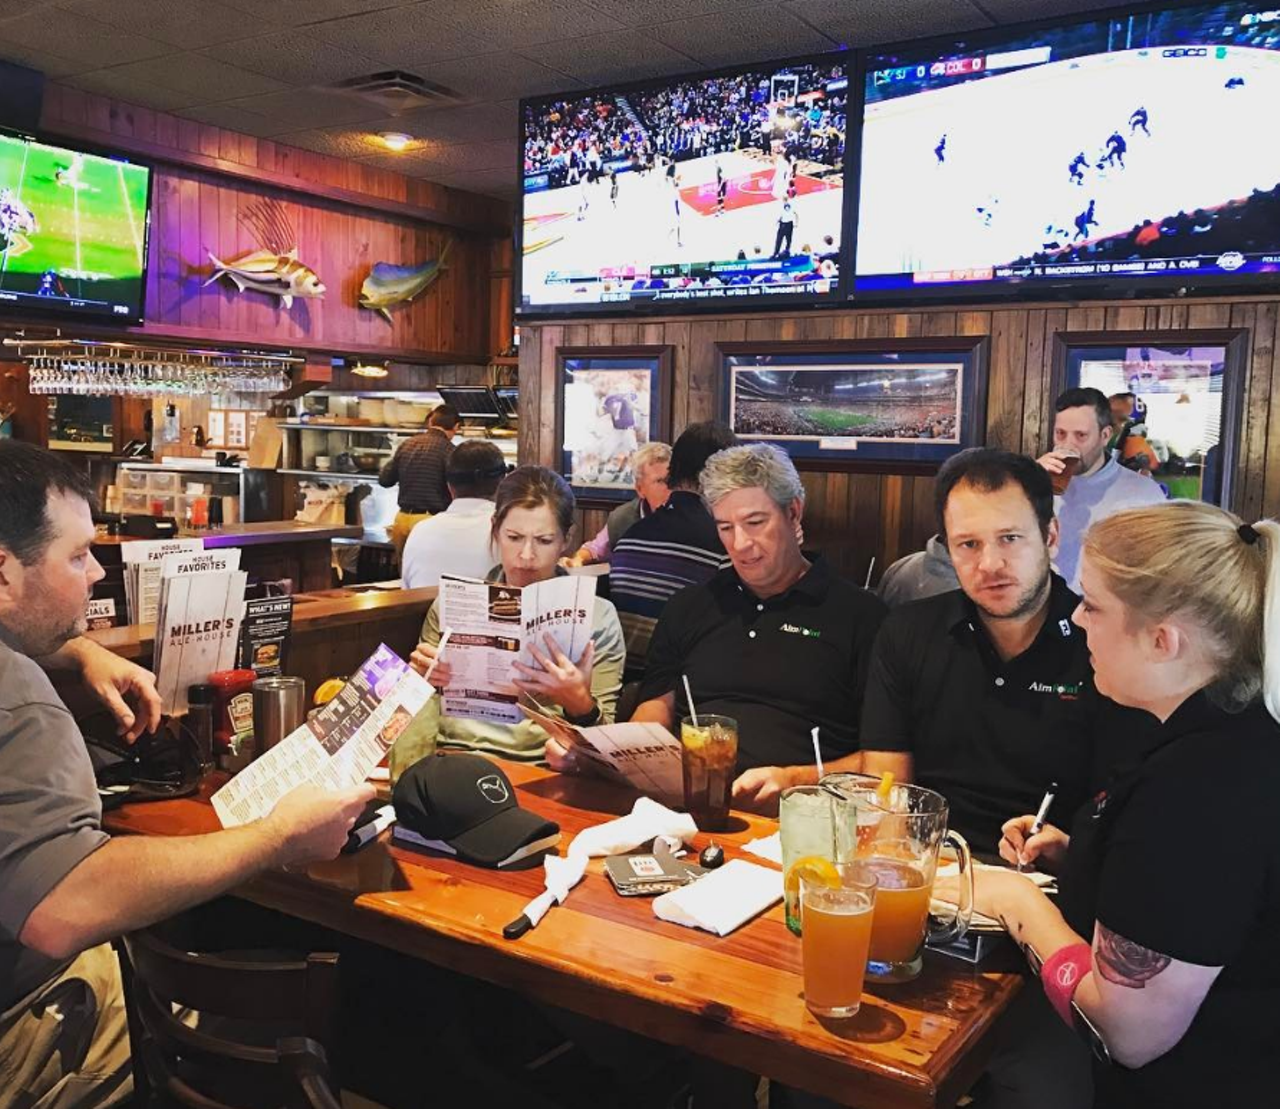 Miller's Ale House
2600 E. Colonial Drive, 407-547-1371
This place might look like your dad's dated basement man-cave, but regulars will tell you that nothing beats a fresh batch of this bar's chicken Zingers on game day. 
Photo via secret.of.choi/Instagram